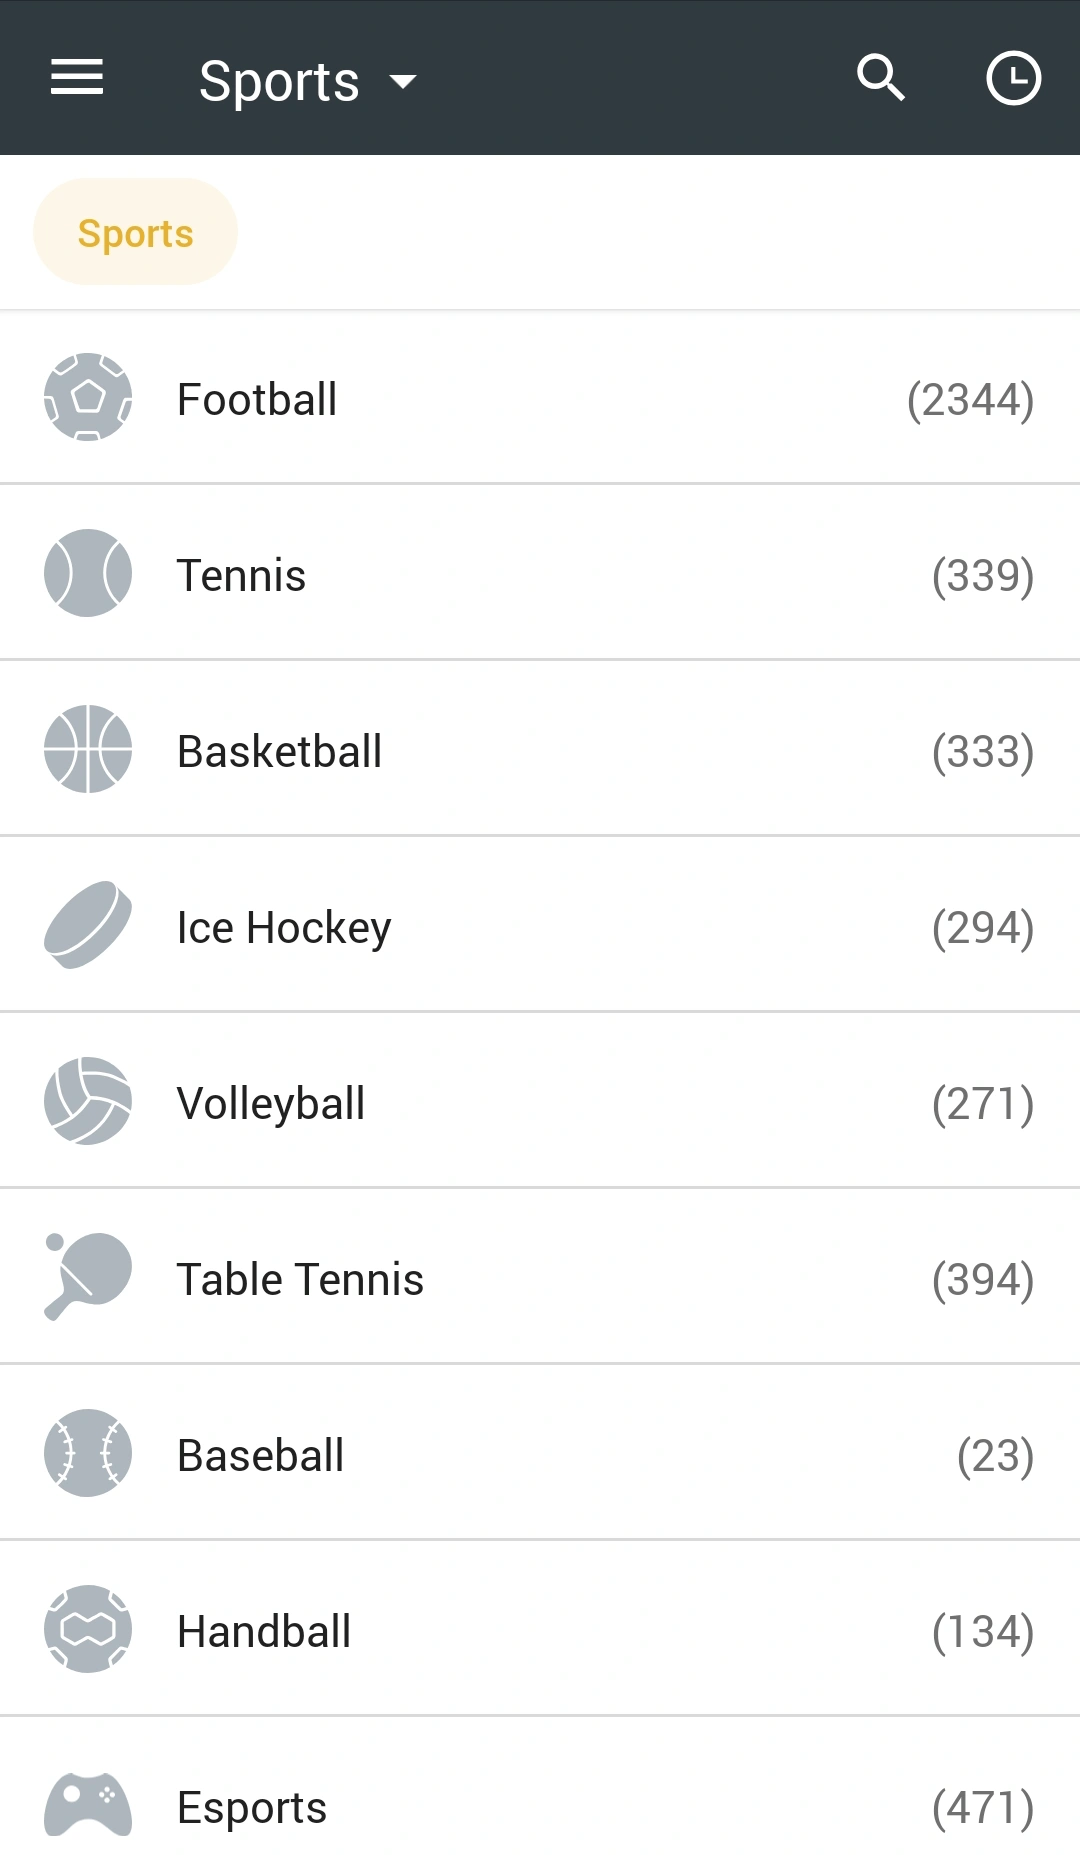 List of available sports categories